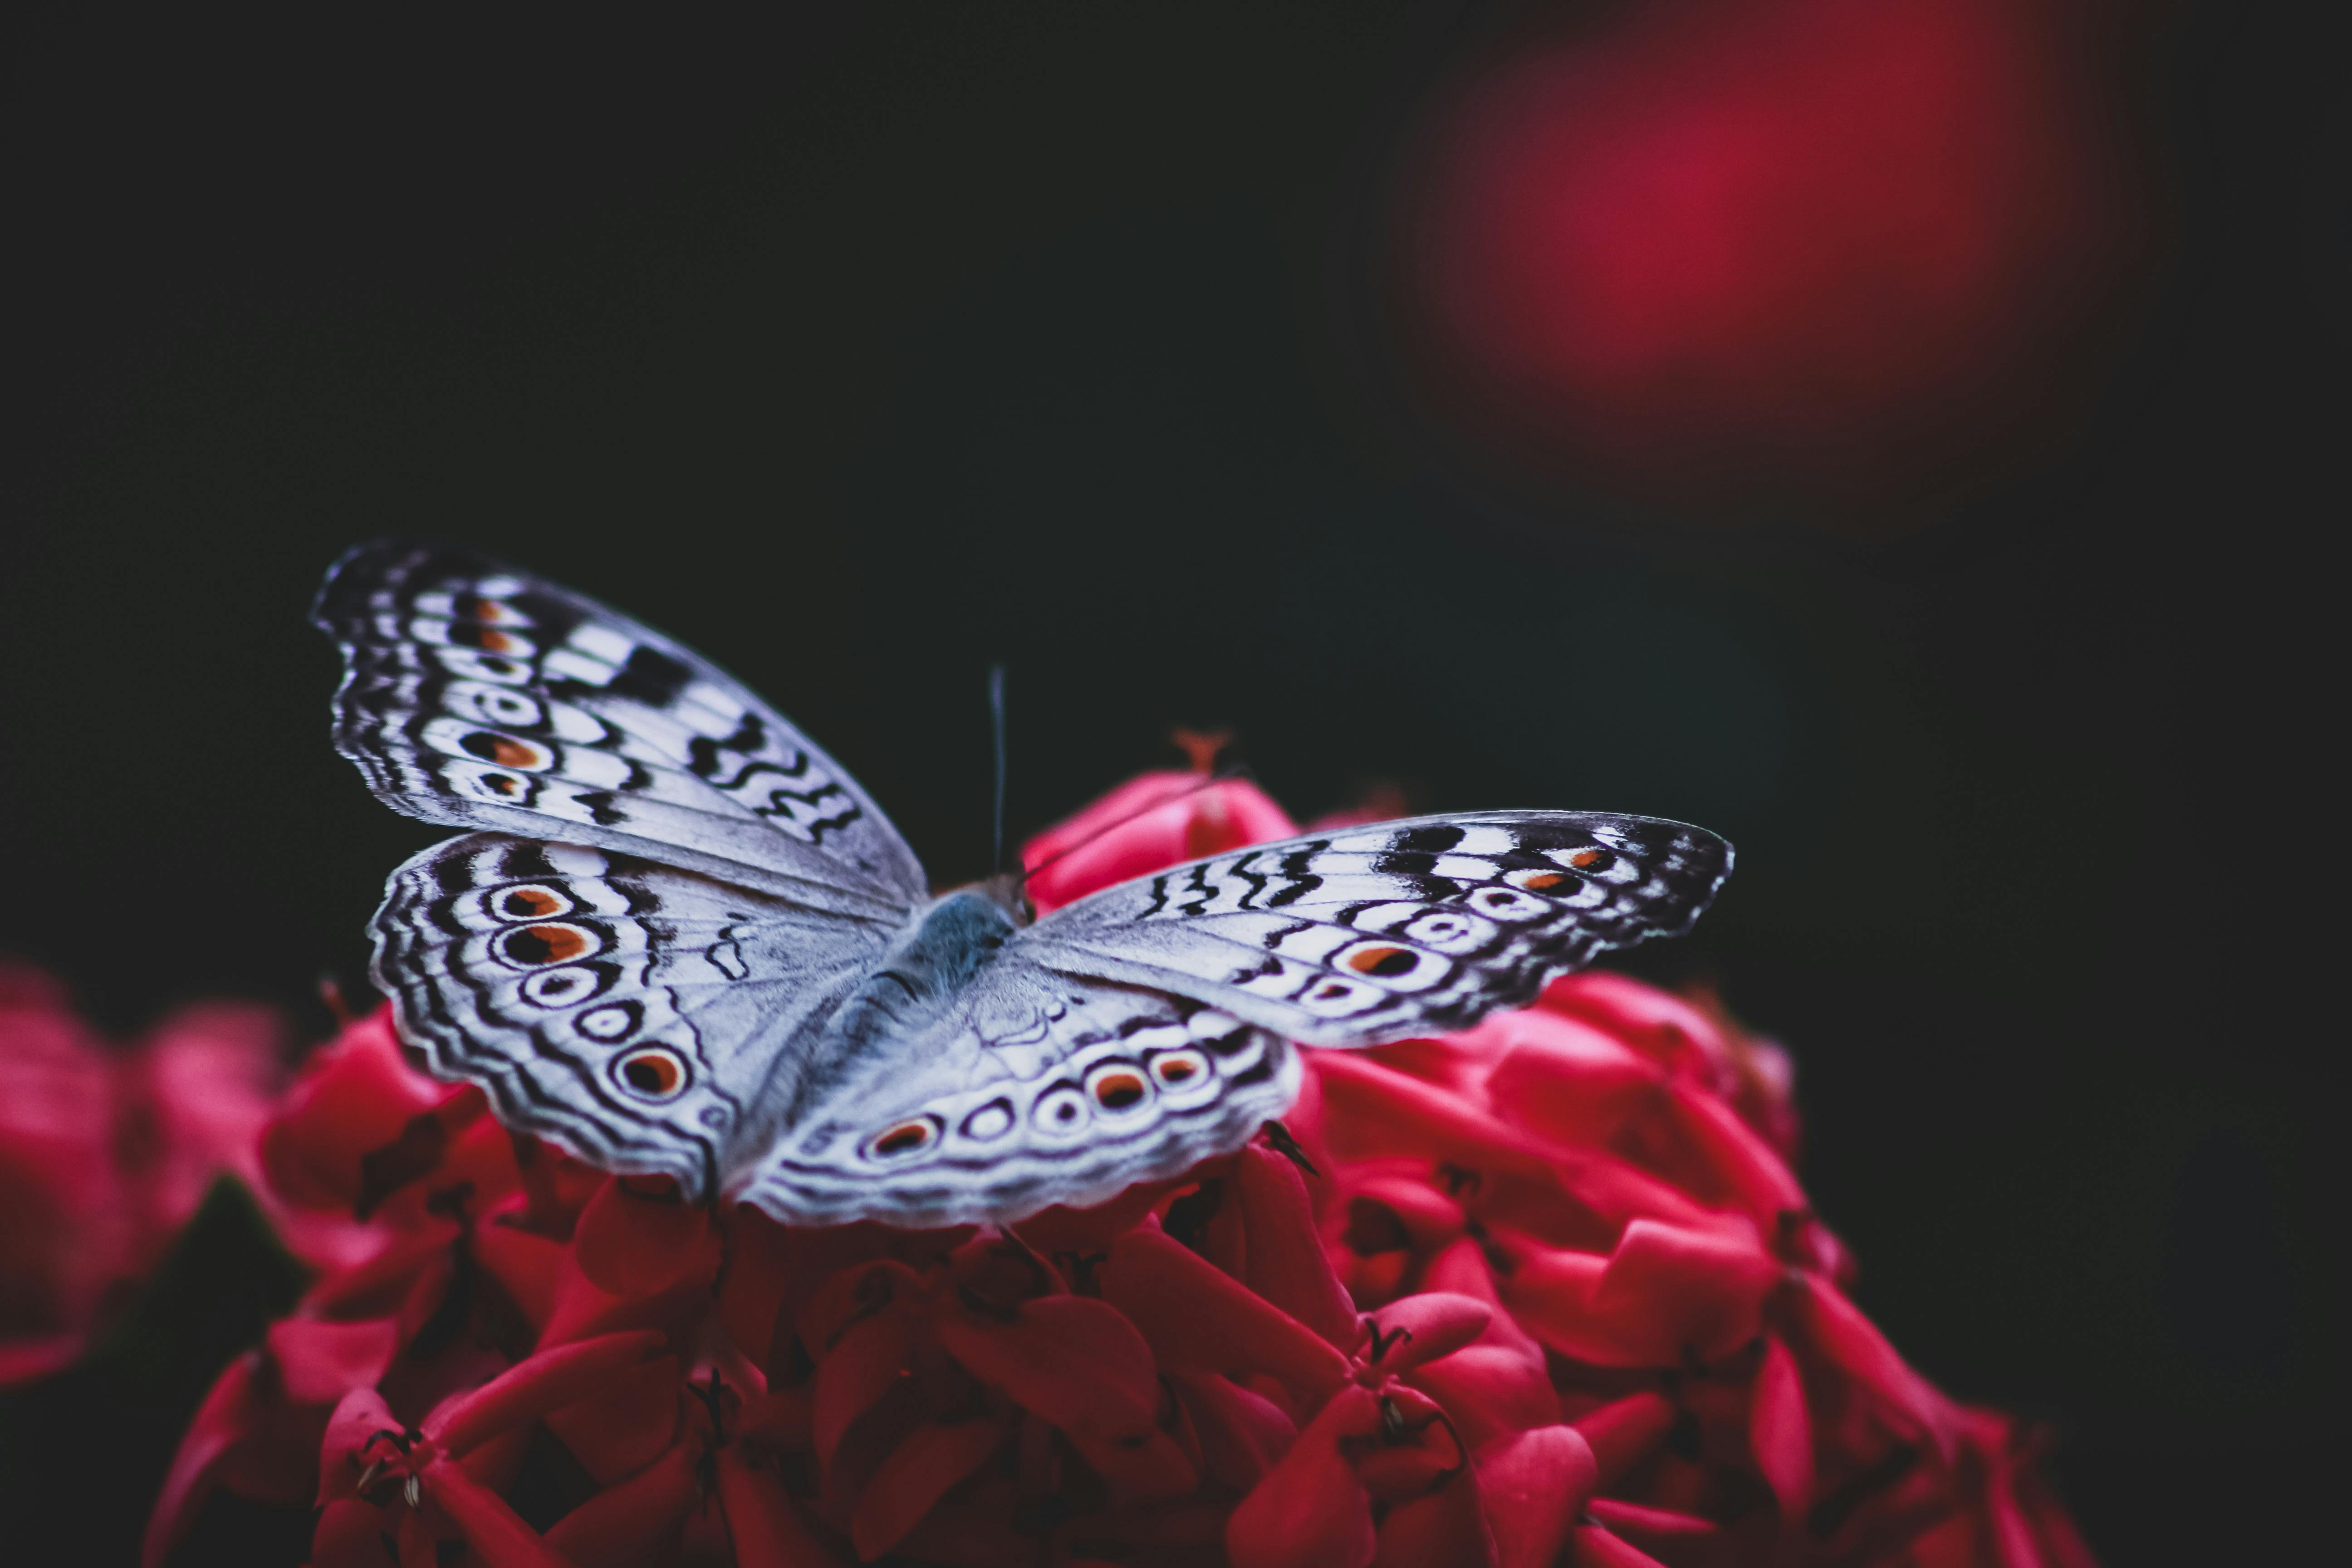 Butterfly Wallpaper Images  Free Download on Freepik